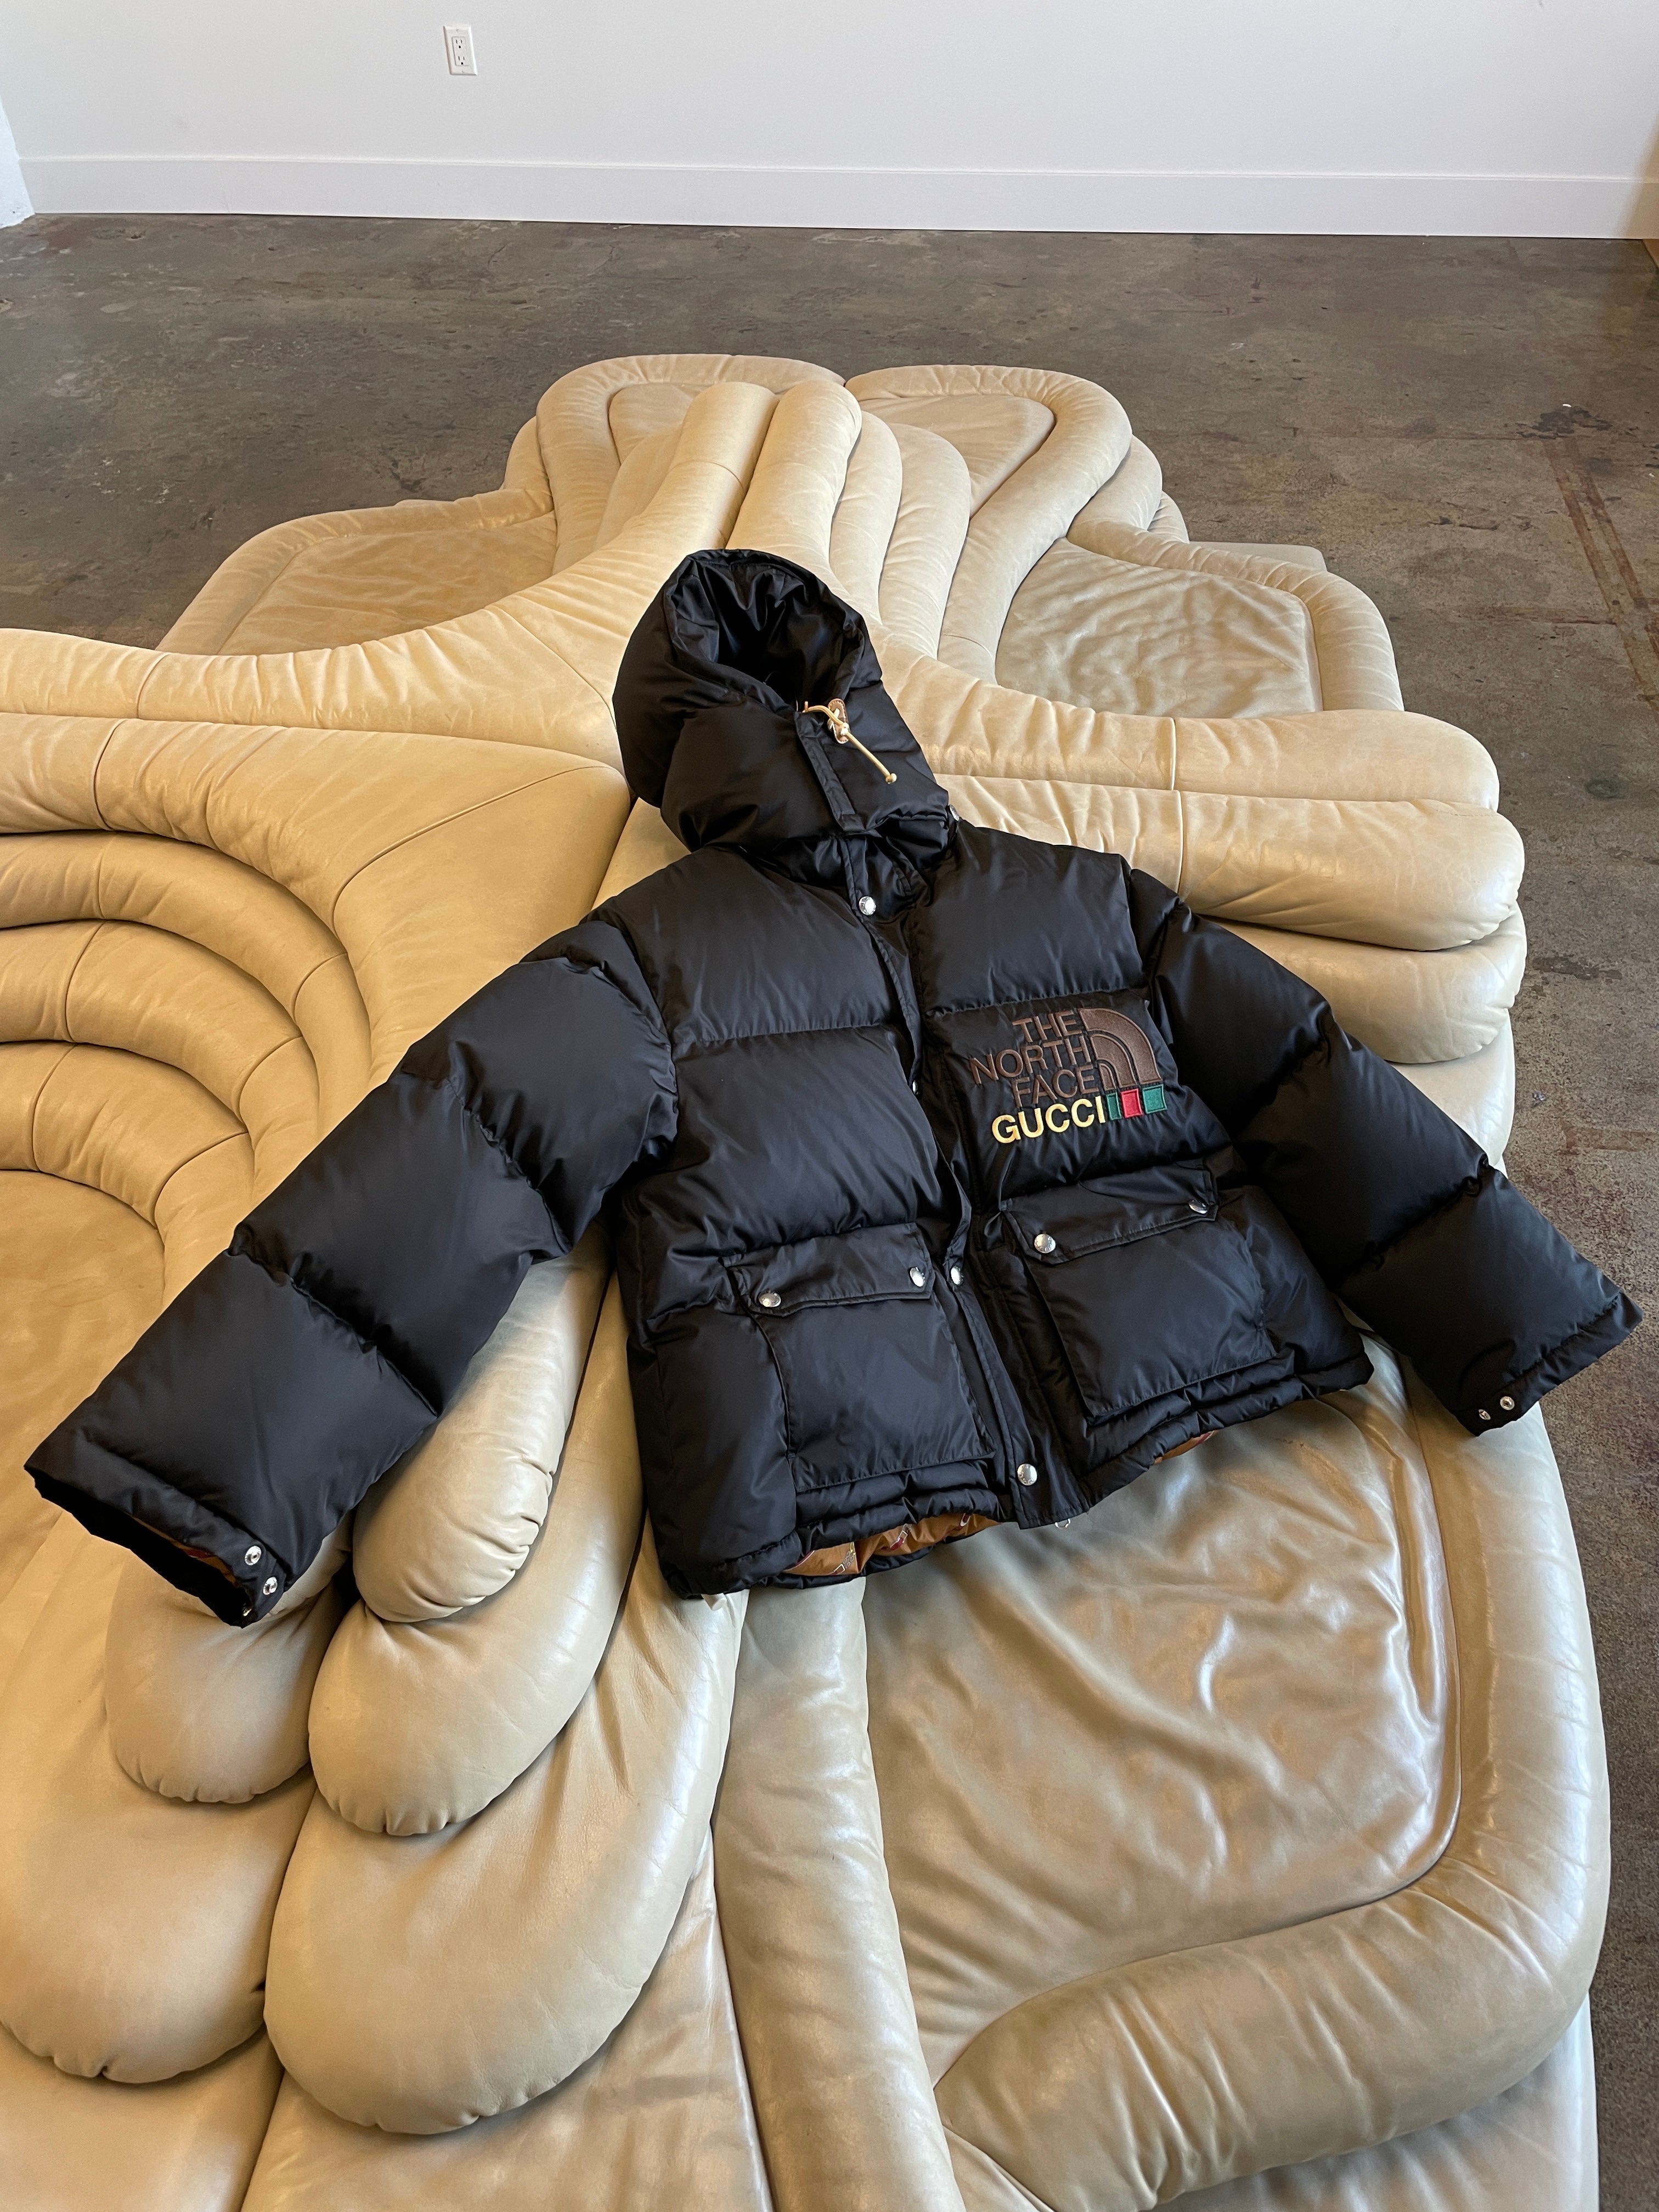 Gucci The North Face Down Coat